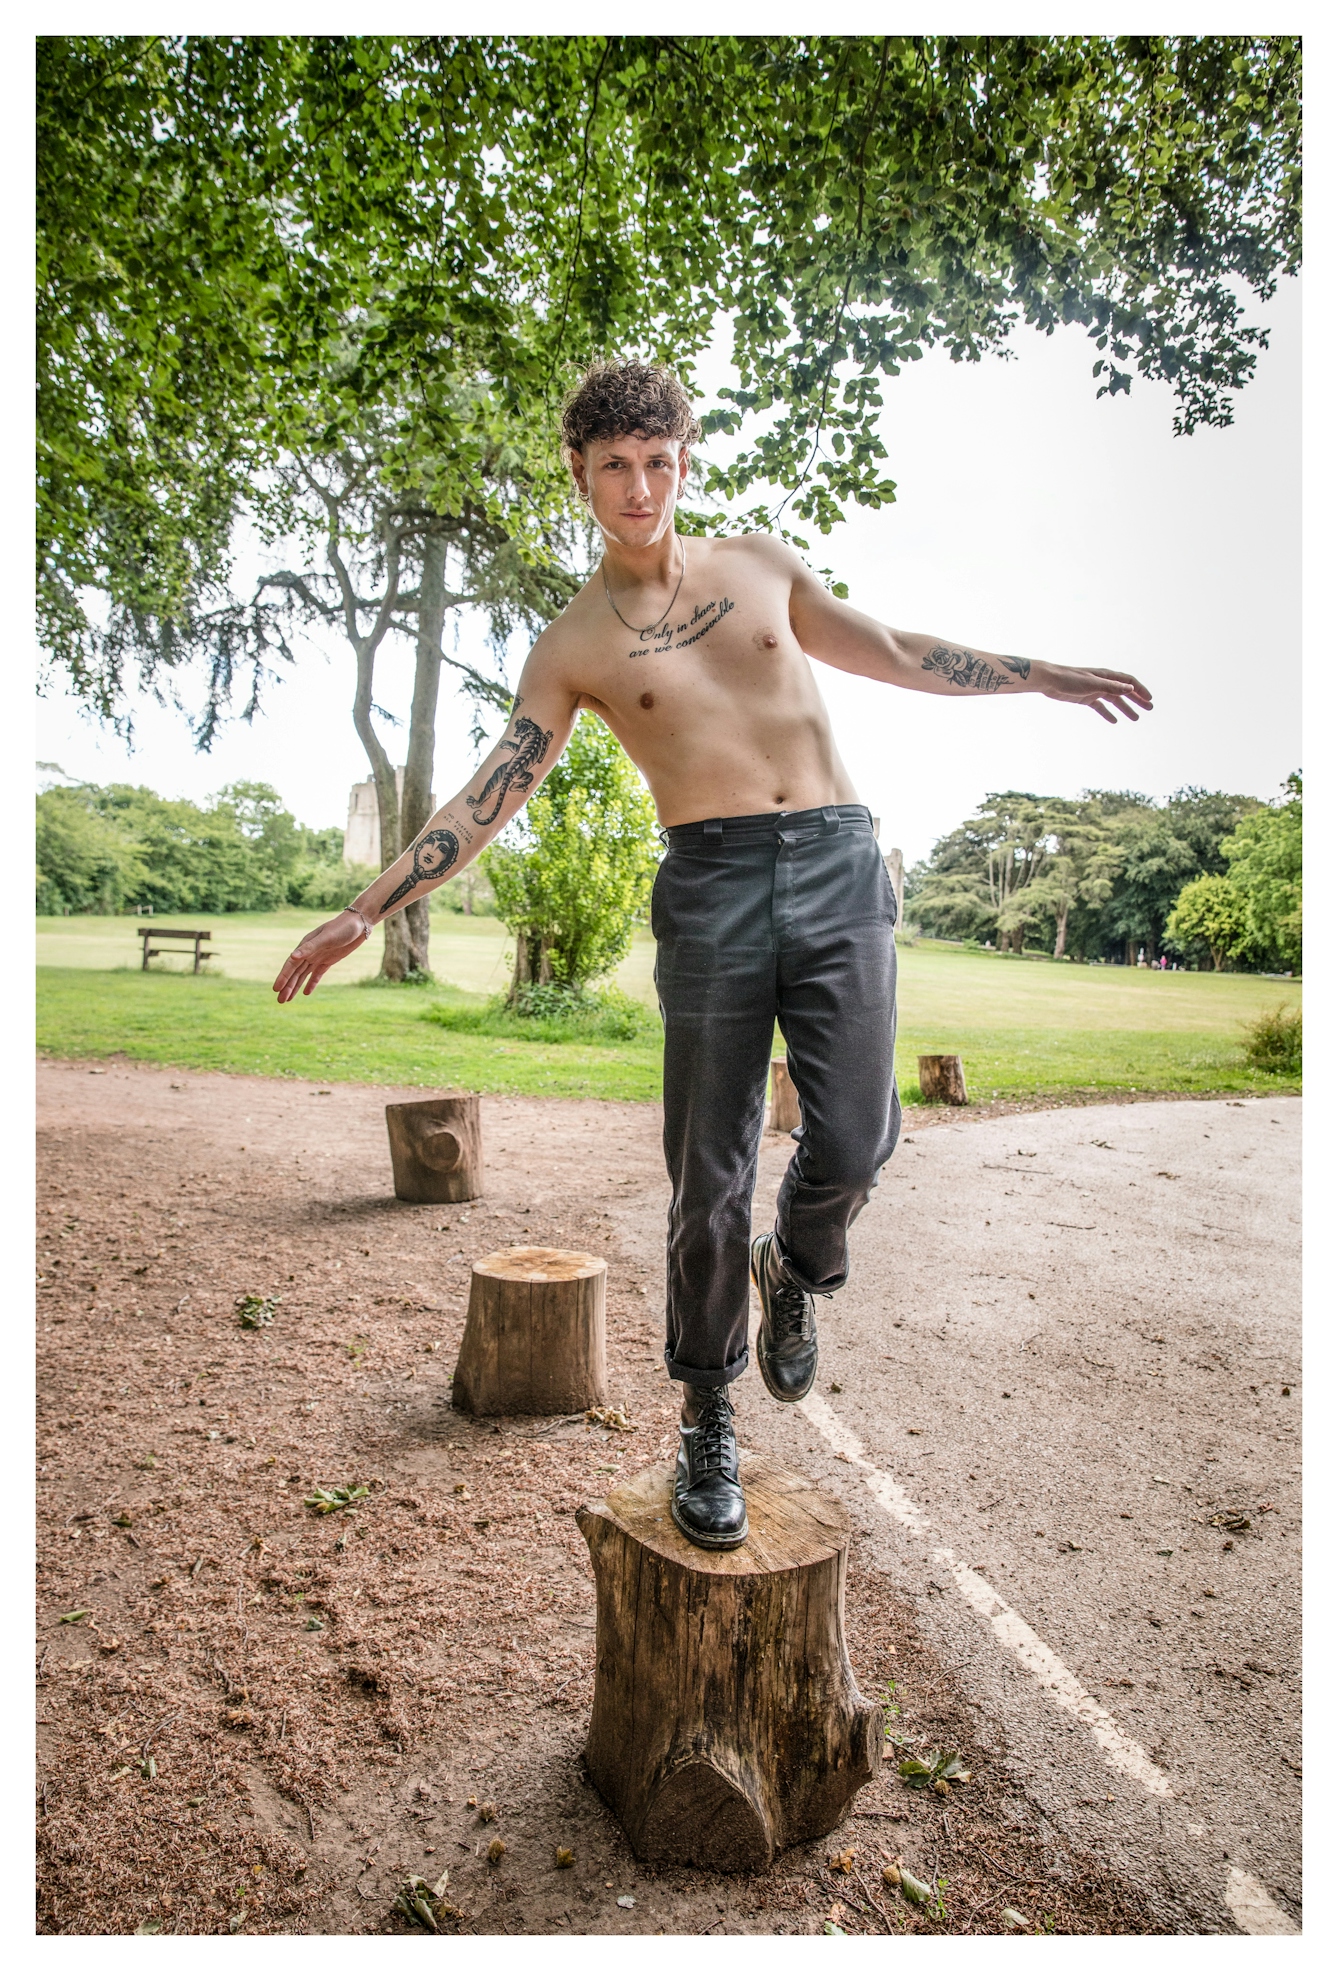 Photograph of a man balancing on a cut tree stump in open parkland. He has his shirt off, reaving his upper torso which is adorned with several tattoos. 
His arms are outstretched, one leg raised off the ground and he's looking straight to camera. Behind him is a large expanse of grass, trees, paths and benches.